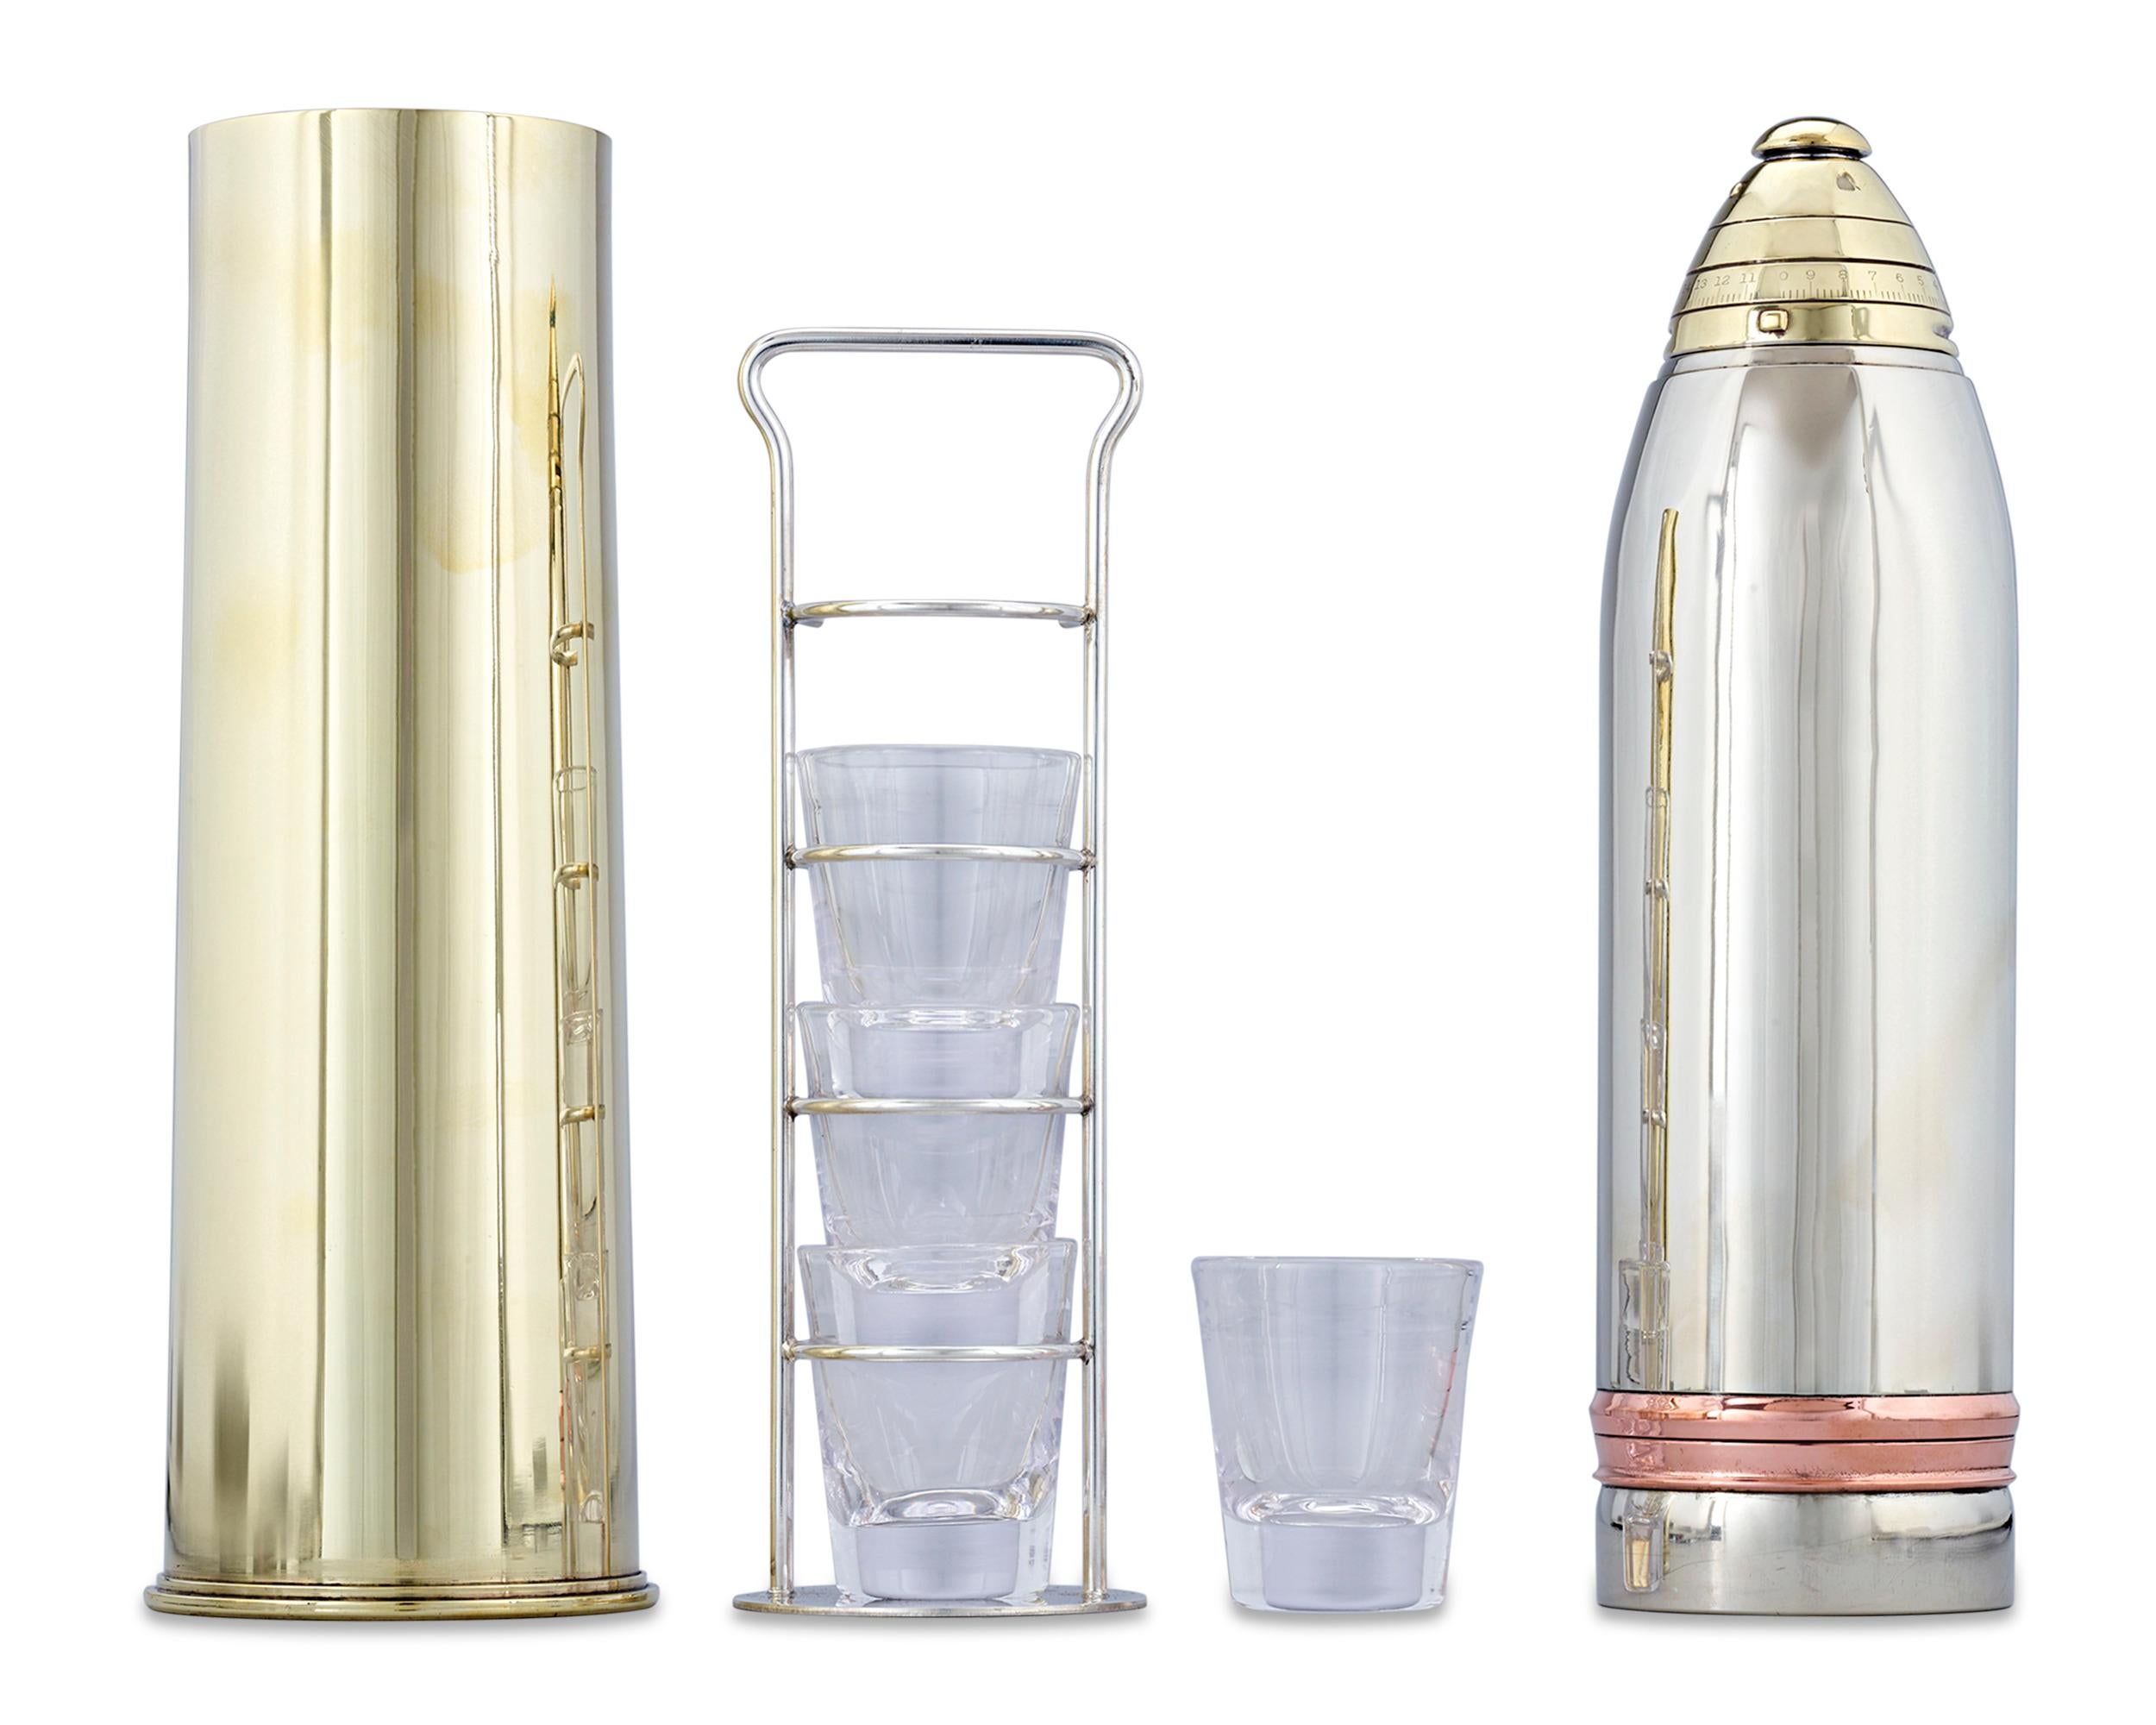 This incredibly rare artillery shell cocktail shaker, crafted by the Gorham Silver Company, is one of the very few remaining of its kind with all of its original parts. Sleek and aerodynamic, the shaker is one of the tallest ever produced and, as a